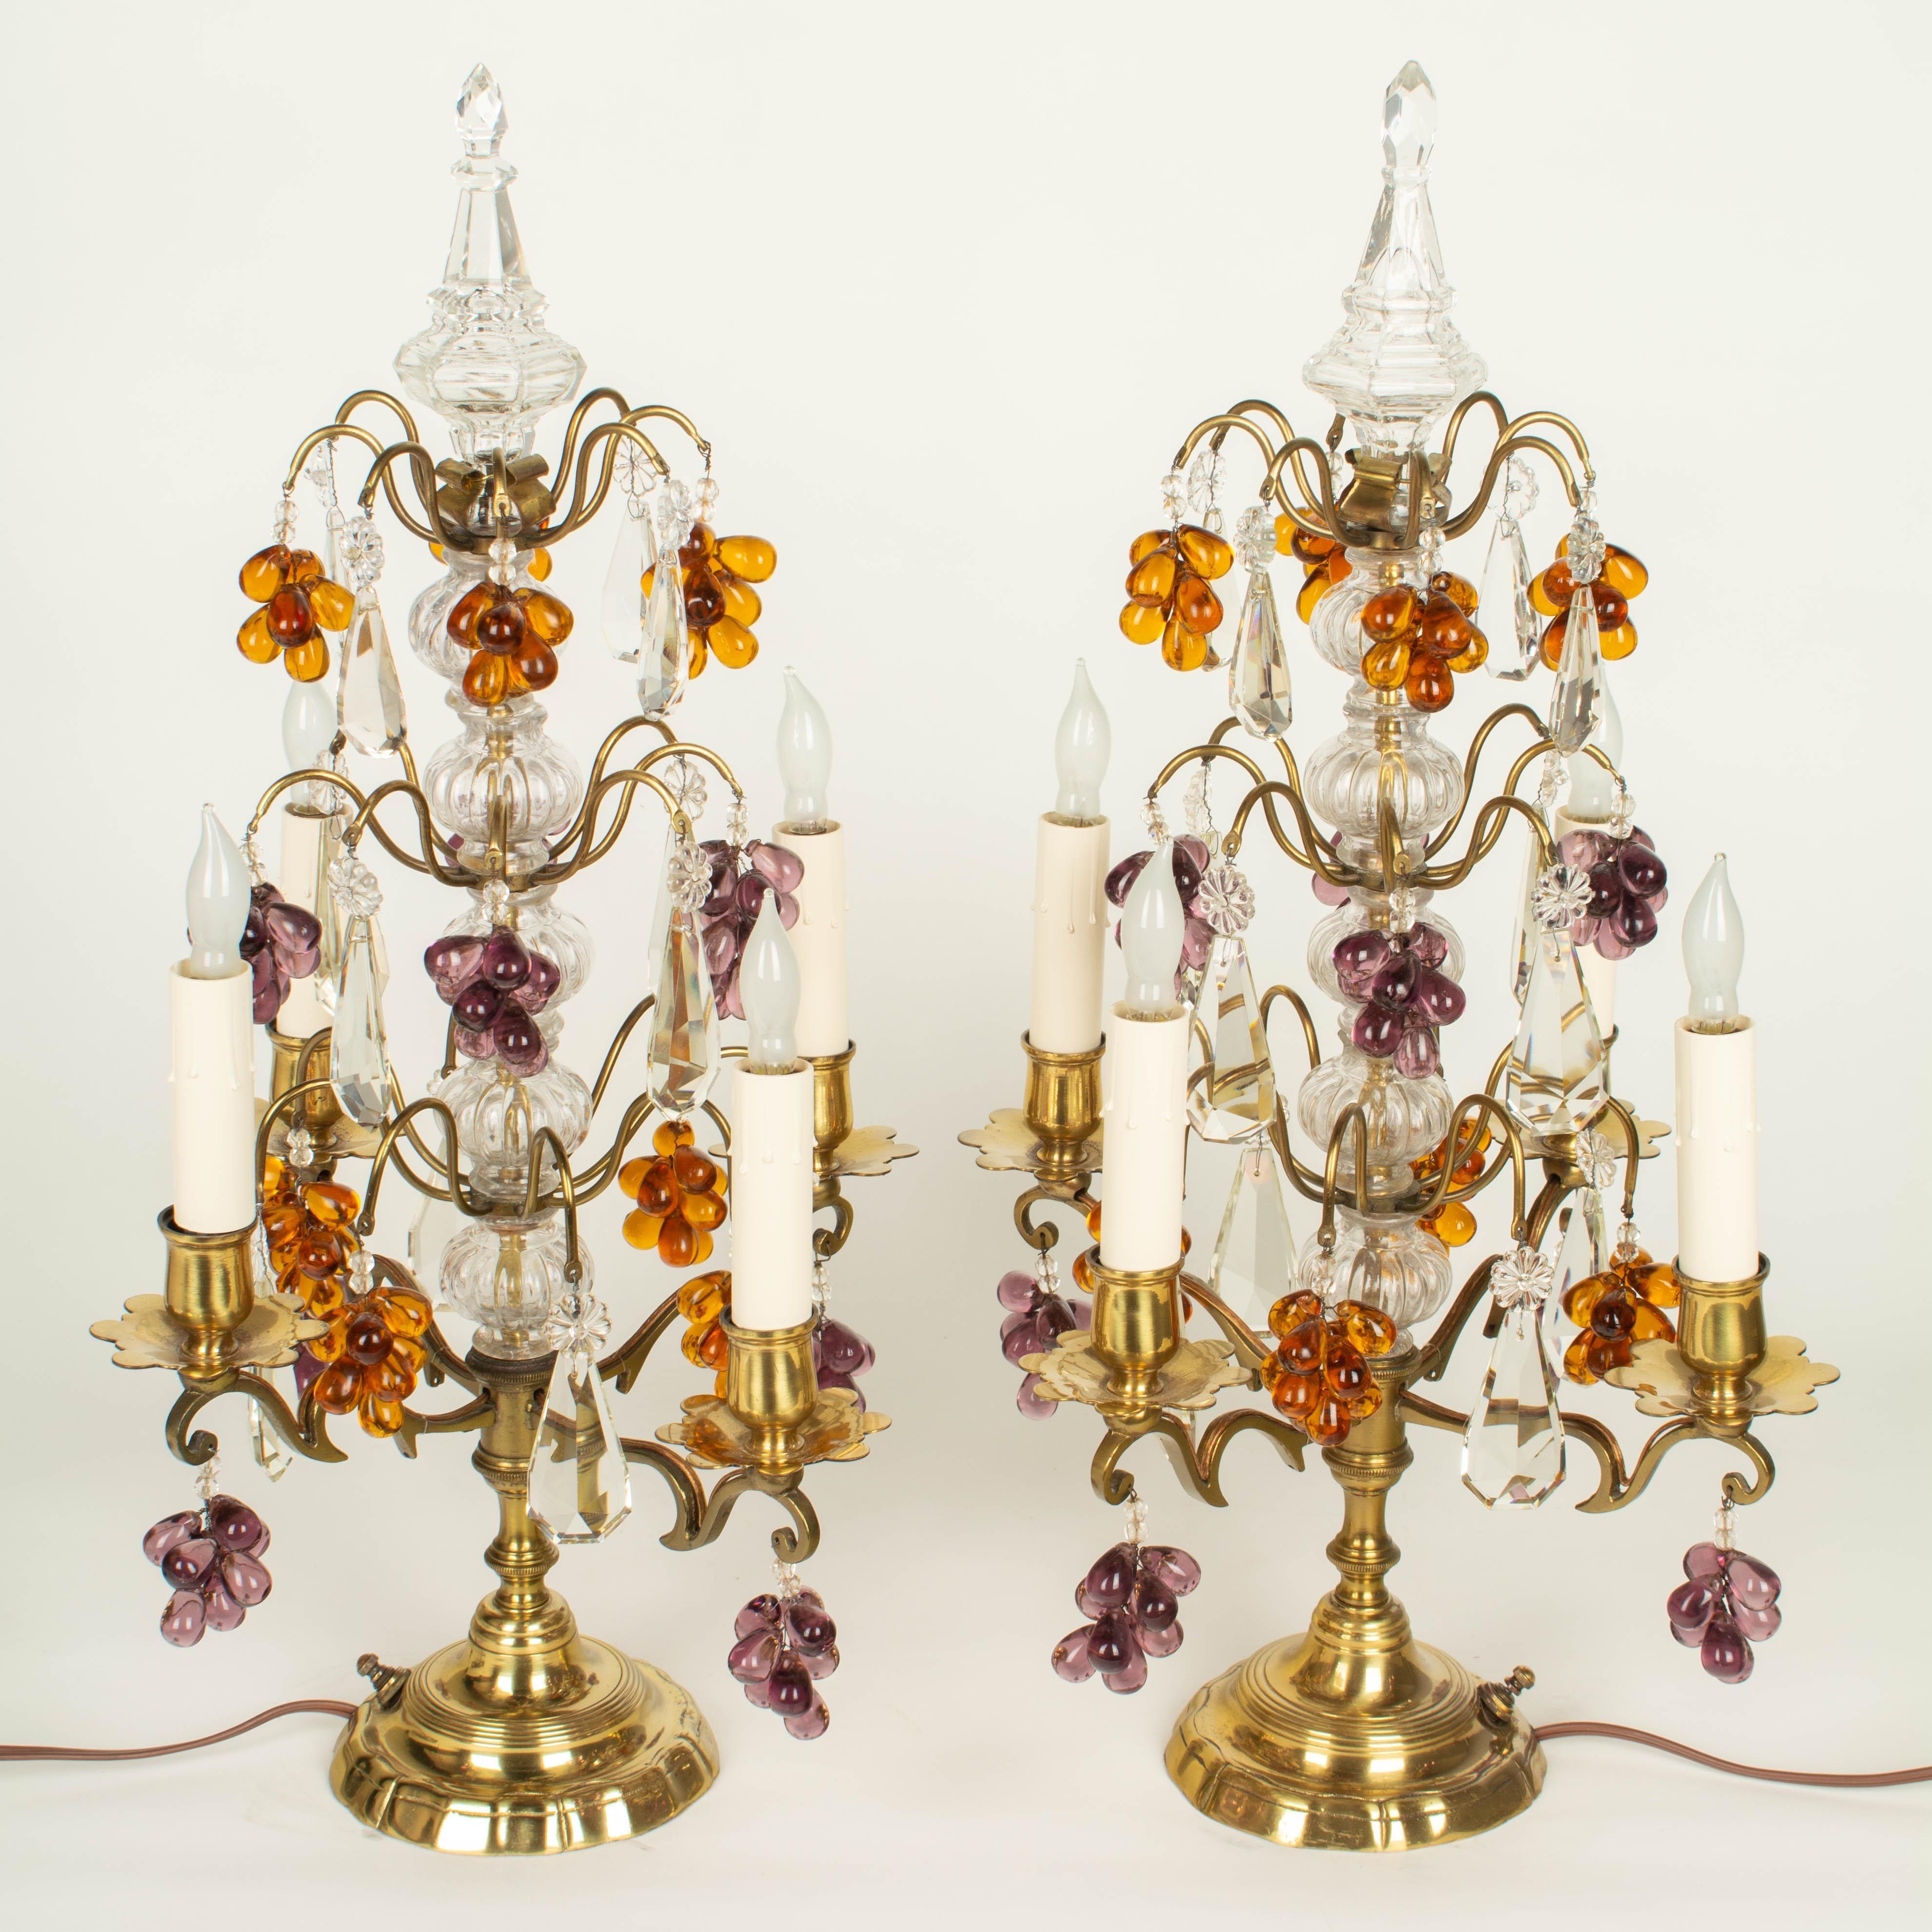 20th Century French Crystal Girandoles with Grape Clusters